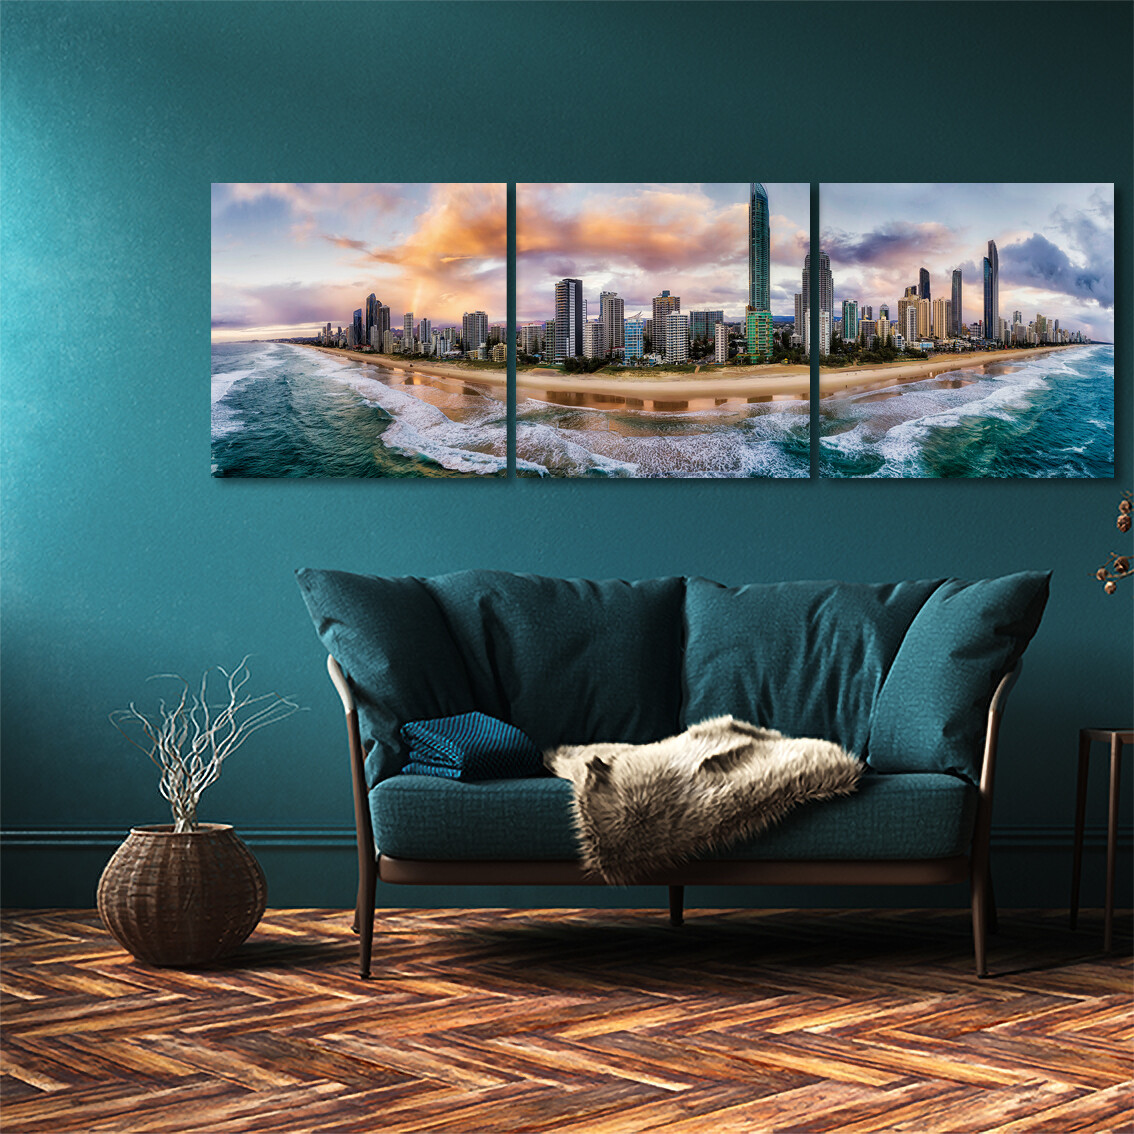 Gold Coast Aerial View (3 Panel) - Modern Luxury Wall art Printed on Acrylic Glass - Frameless and Ready to Hang